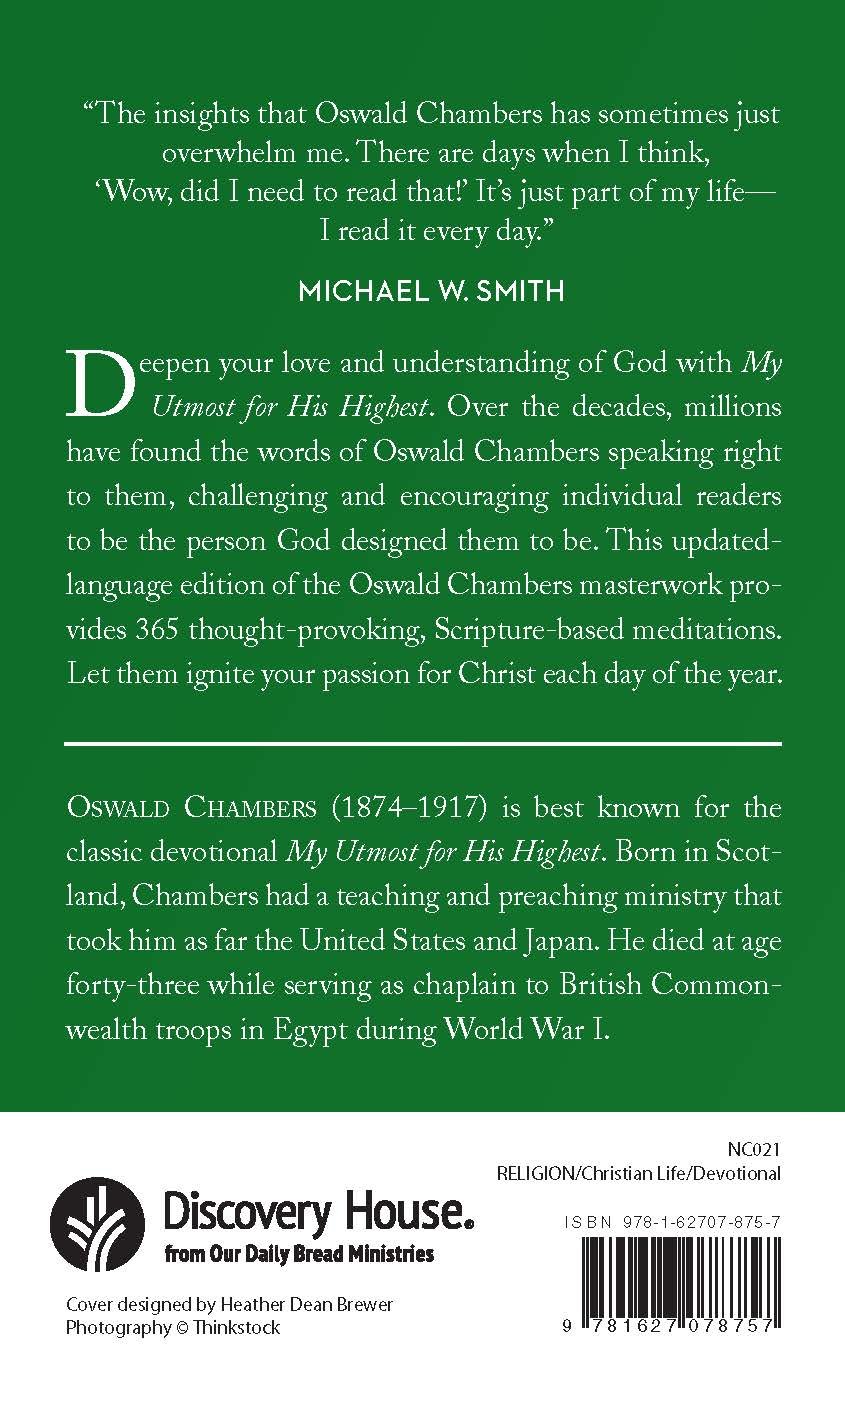 My Utmost for His Highest: Updated Language Paperback (Authorized Oswald Chambers Publications)